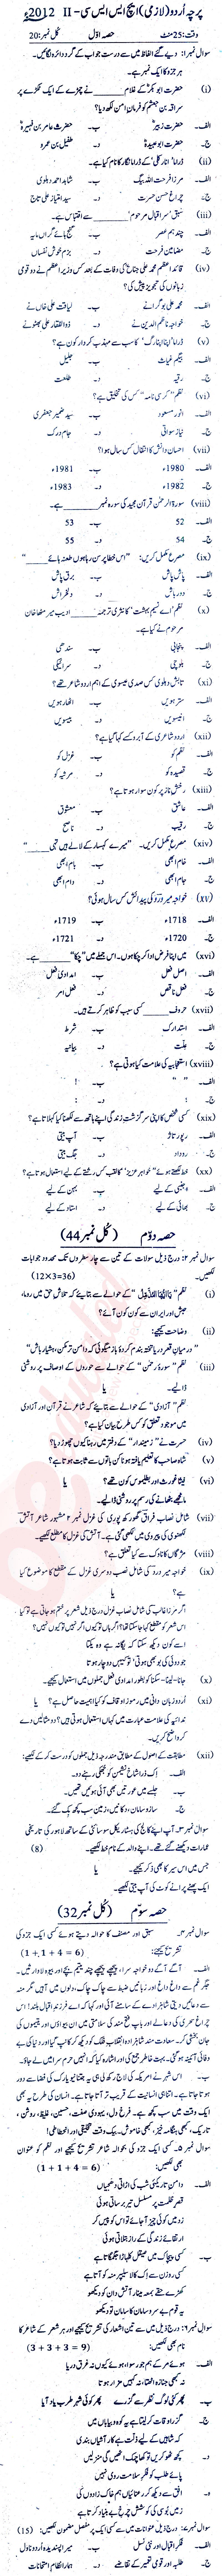 Urdu 12th class Past Paper Group 1 Federal BISE  2012